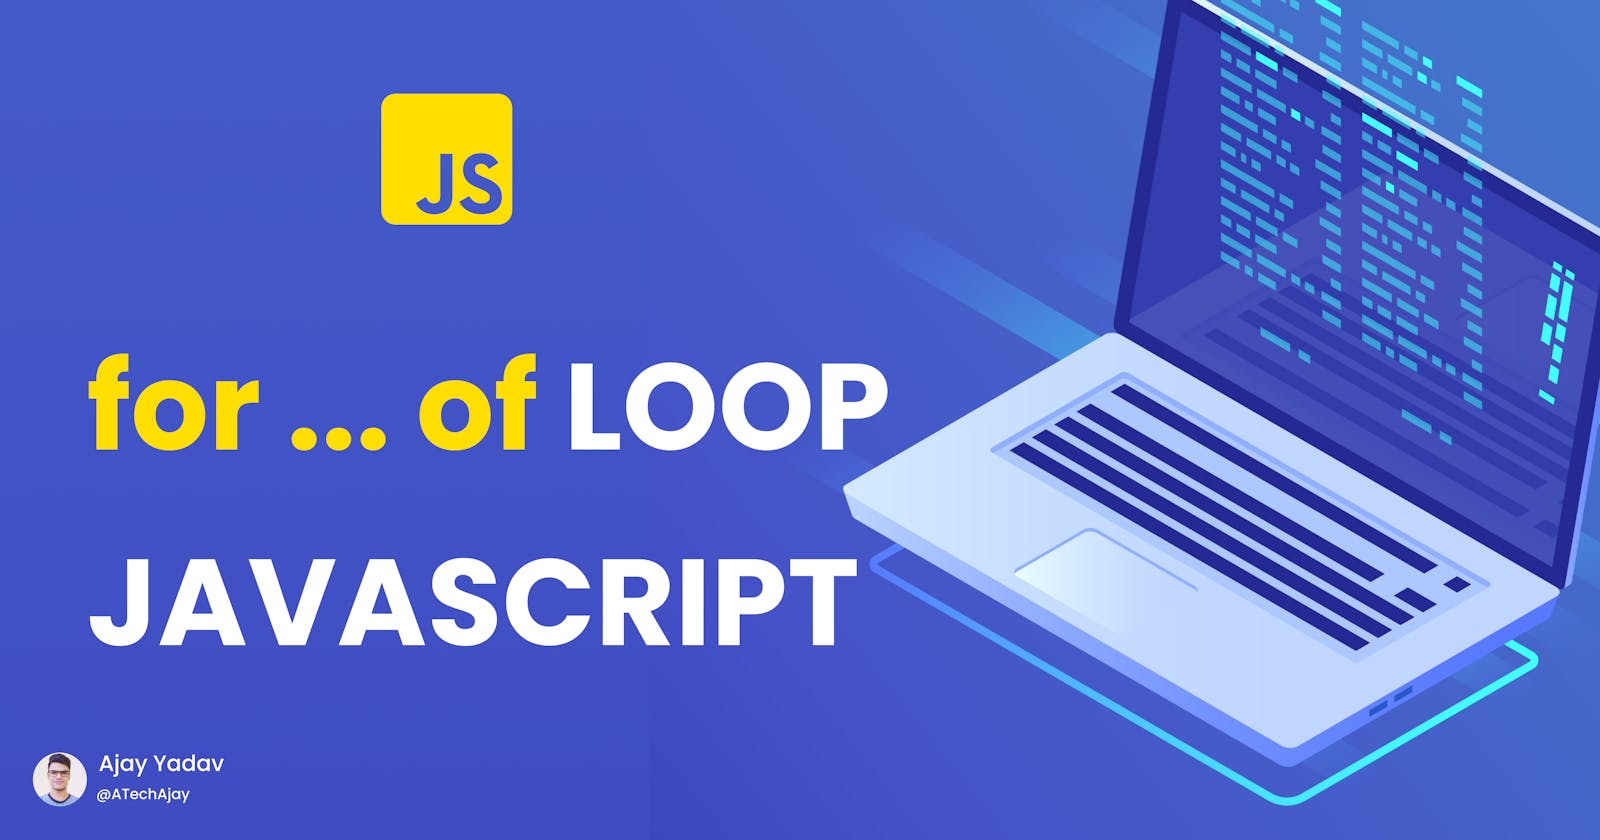 Explanation to the for ... of loop in JavaScript